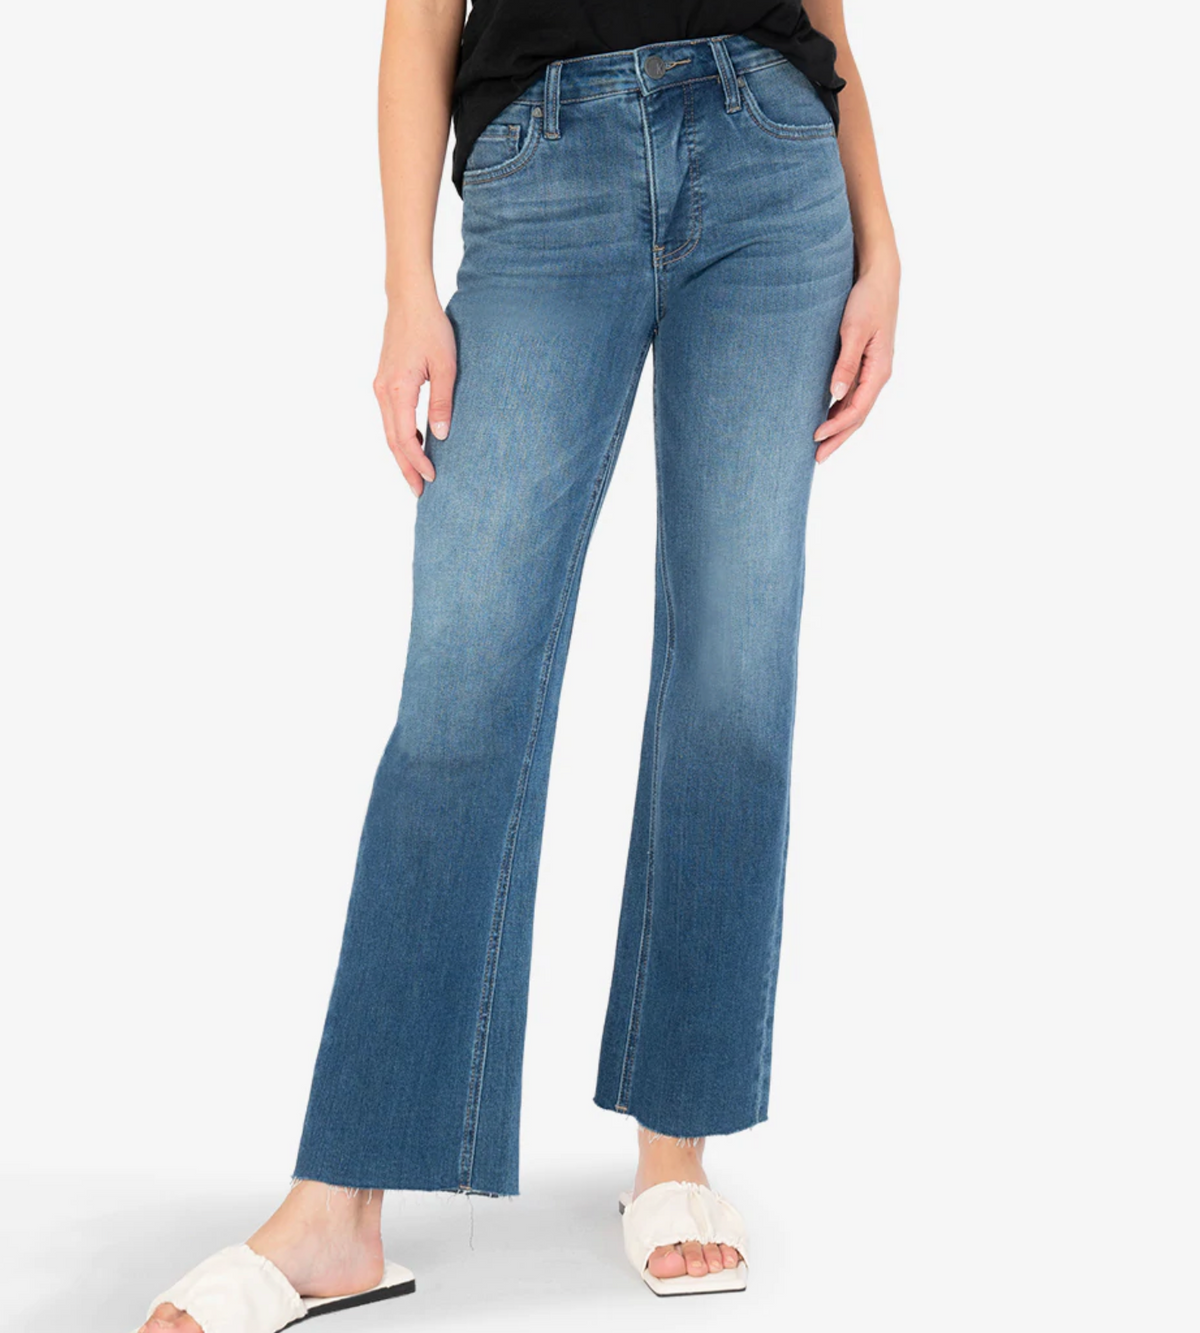 Kut Kelsey High Rise Ankle Flare Jean